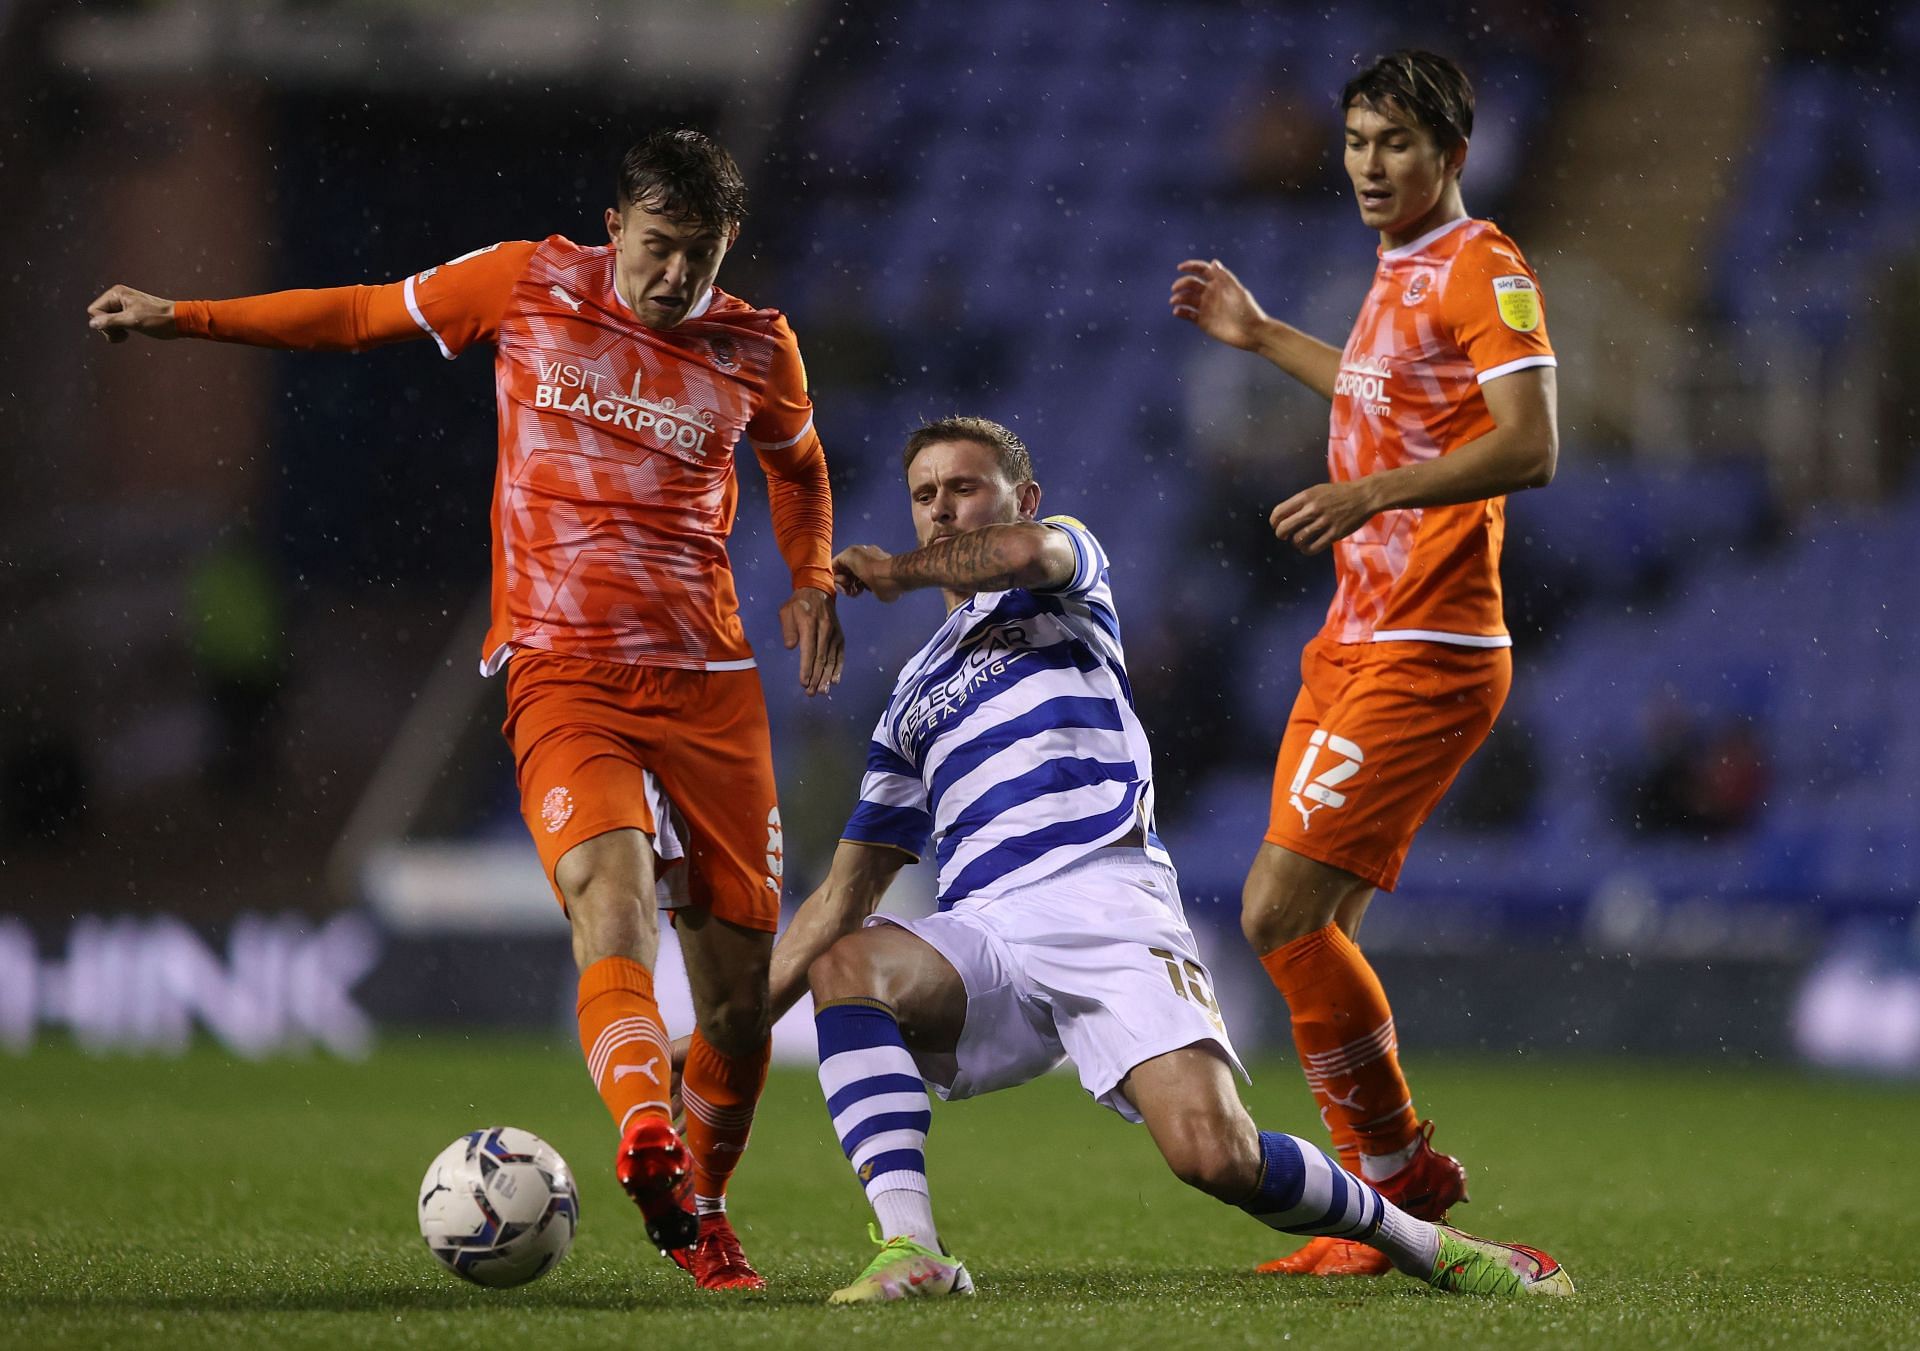 Reading and Blackpool have drawn their last three clashes at the Oakwell